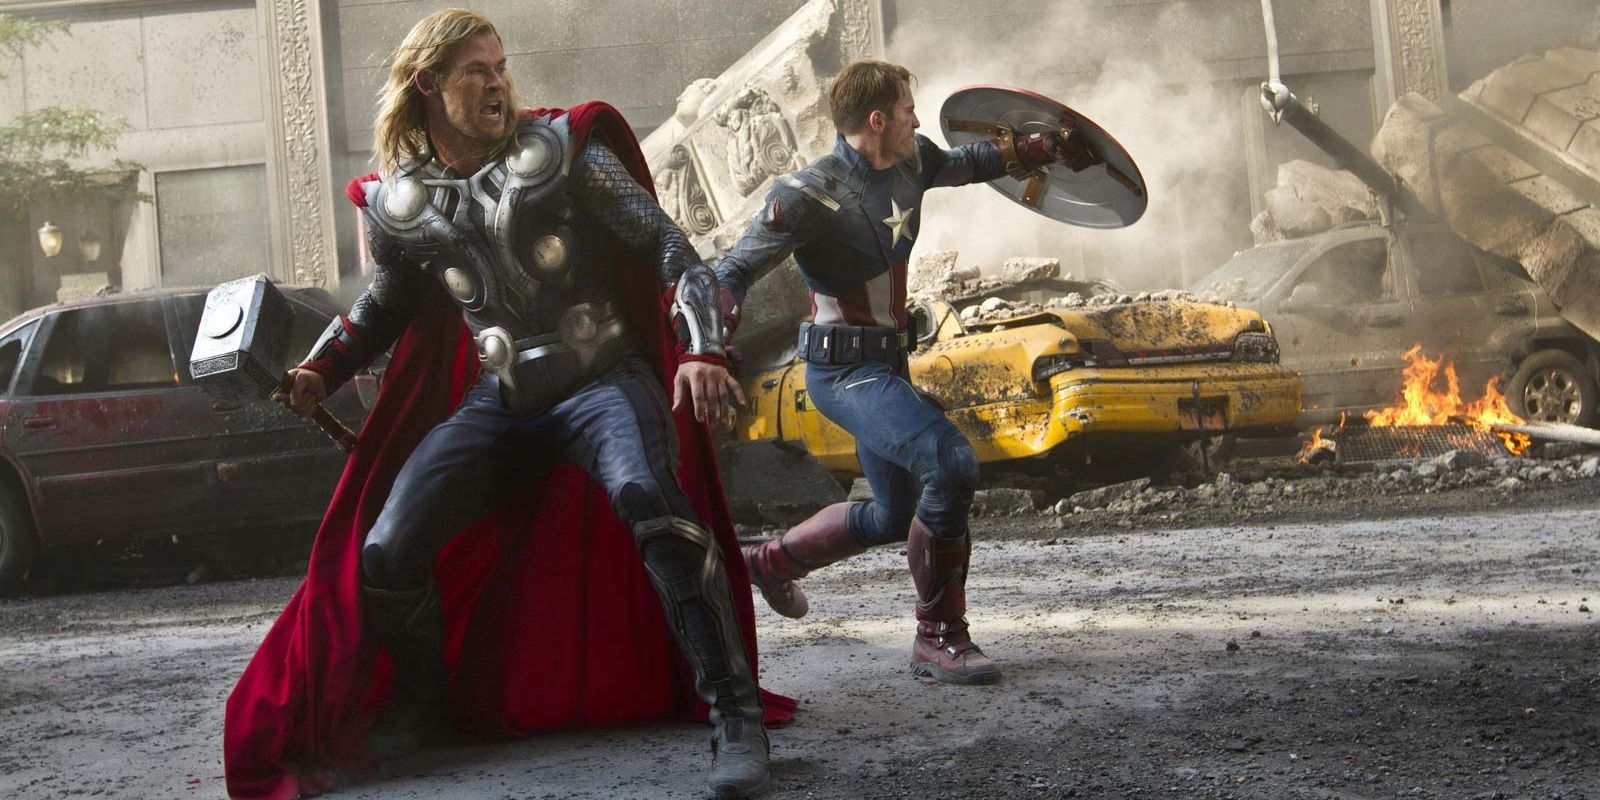 Cap and Thor fight alongside each other in The Avengers